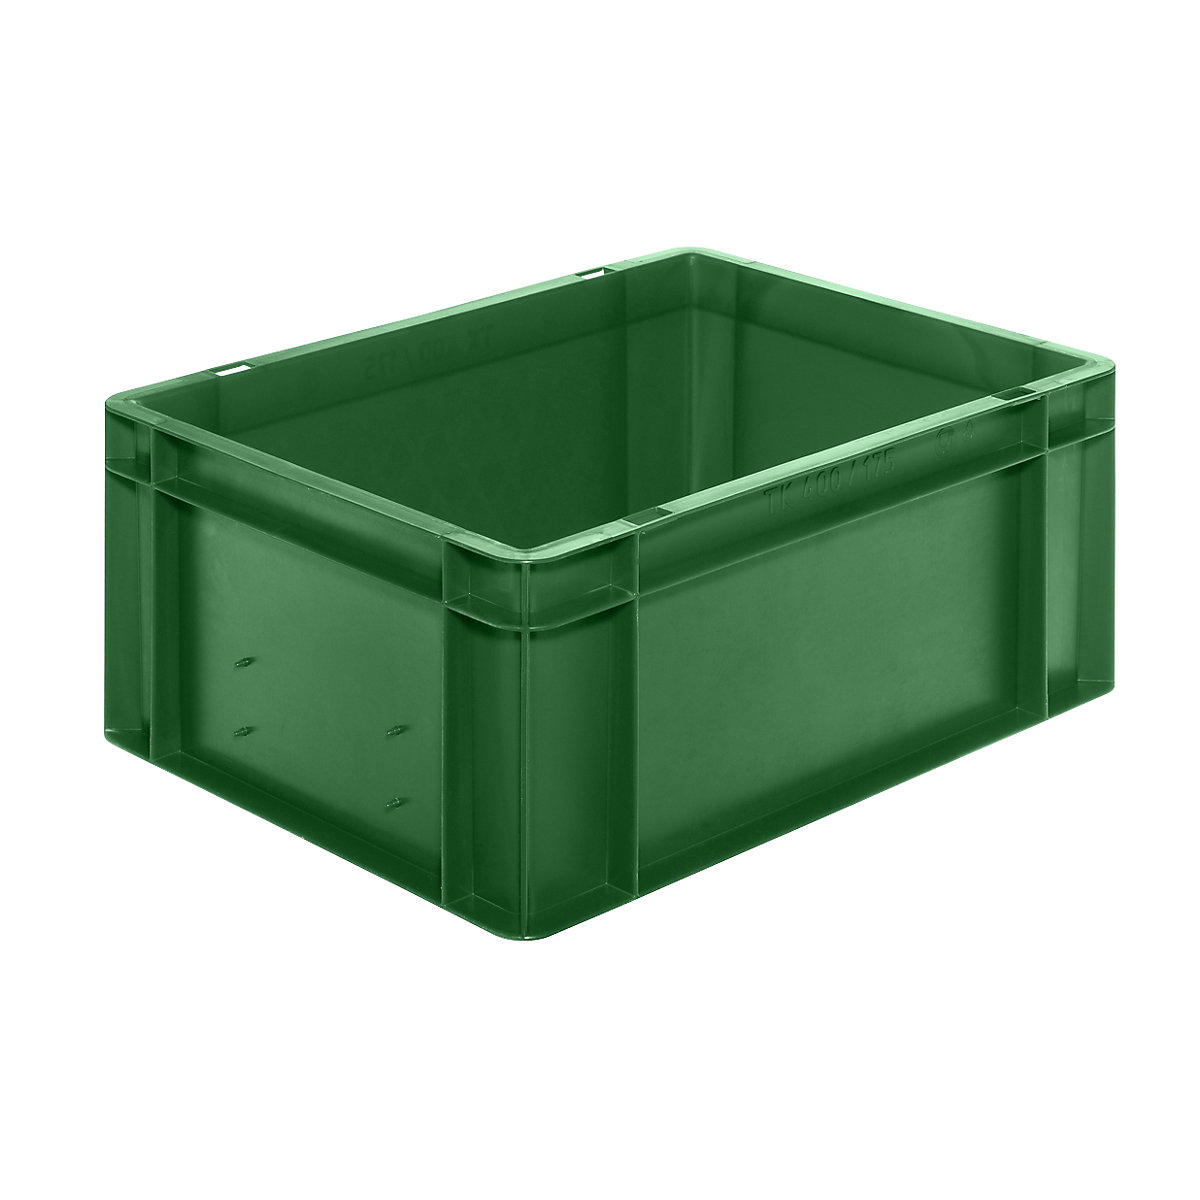 Euro stacking container, closed walls and base, LxWxH 400 x 300 x 175 mm, green, pack of 5